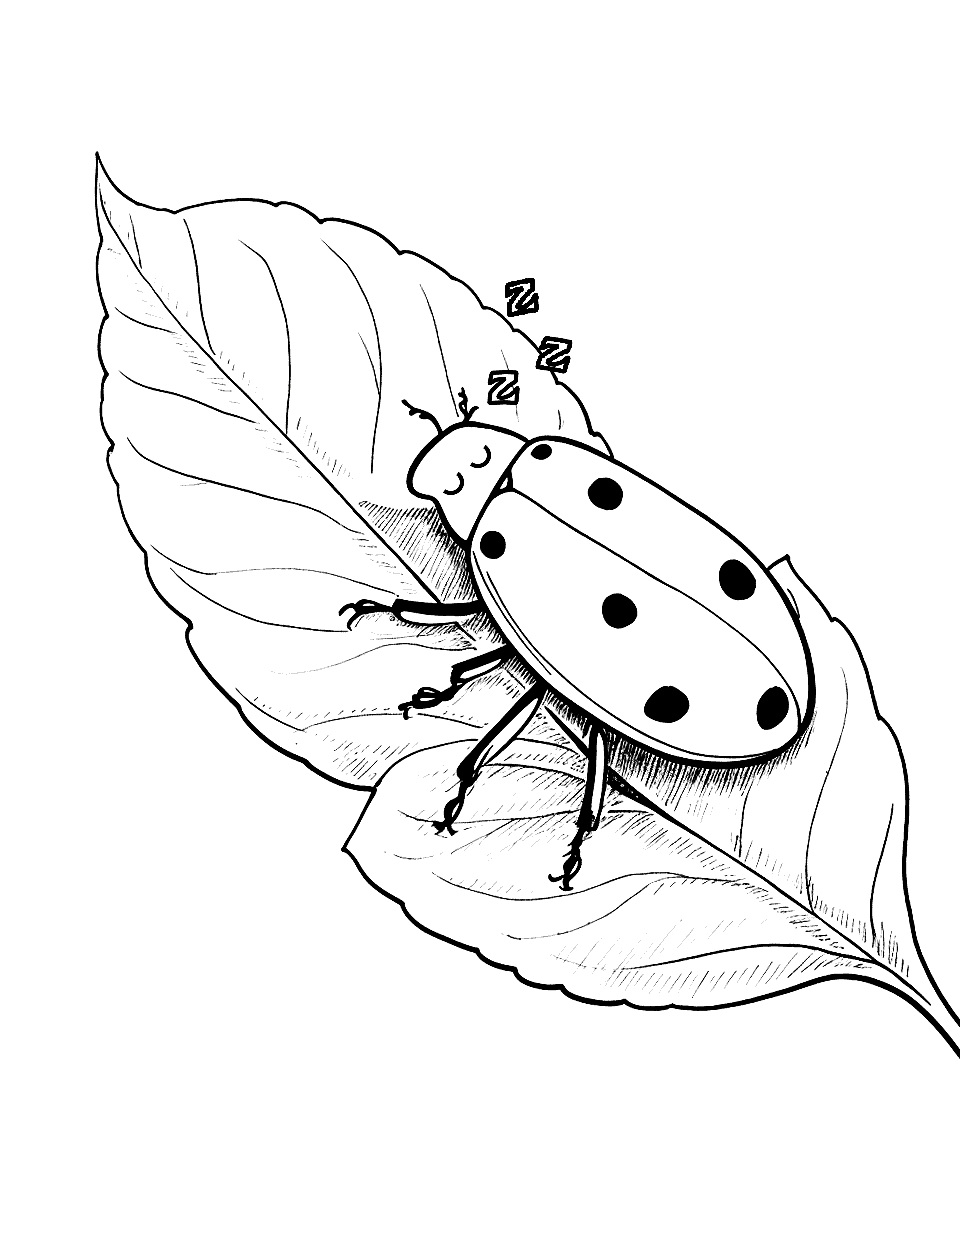 Lazy Afternoon for a Ladybug Coloring Page - A ladybug napping on a leaf.